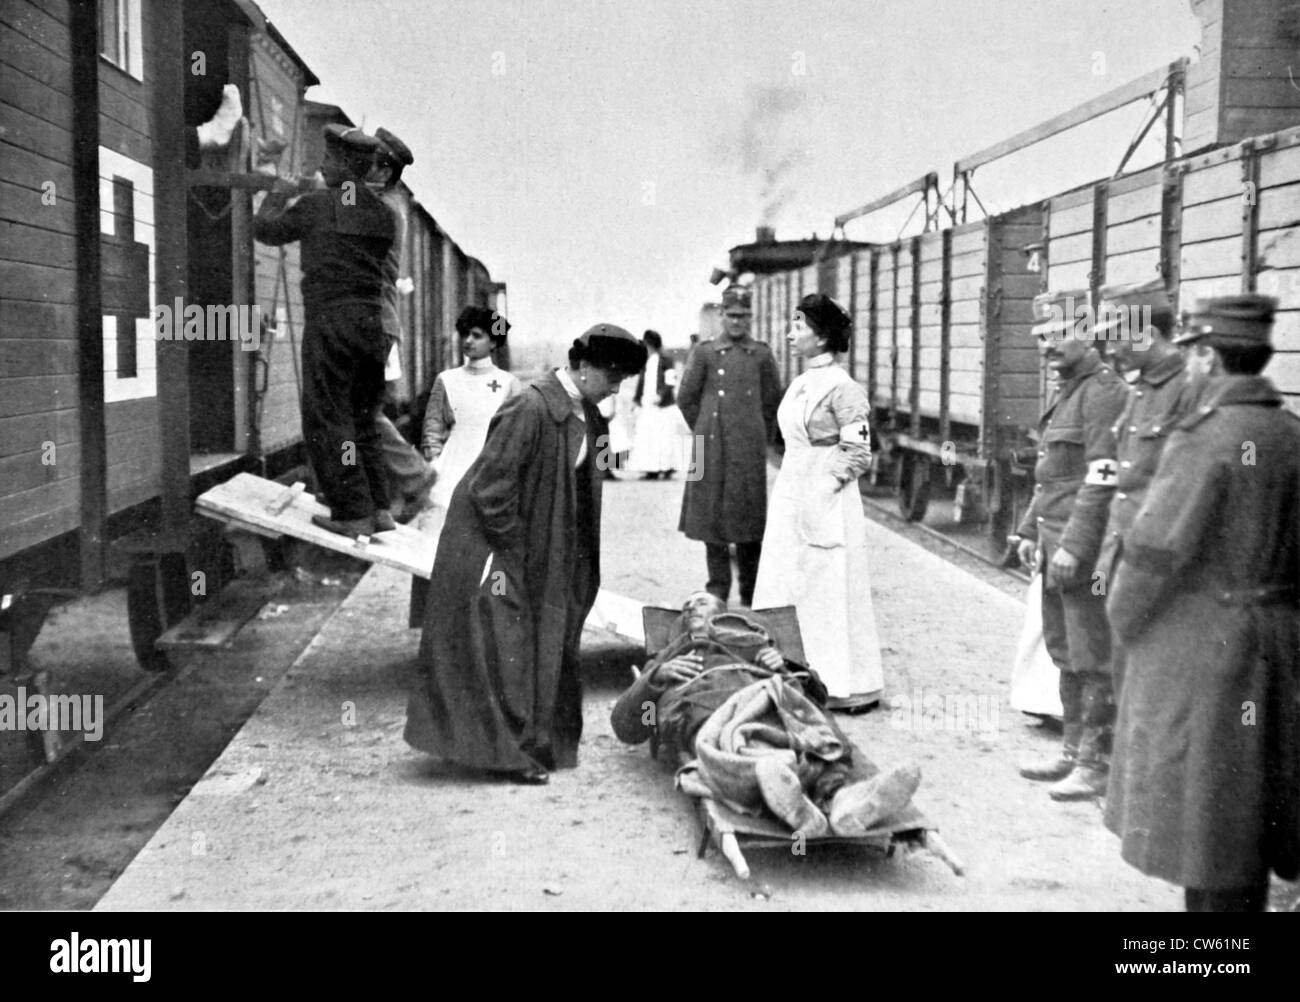 On platforms Larissa train station imperial Russian princess Helena Prince Nicolas Greece's wife is nursing wounded Thessaly Stock Photo